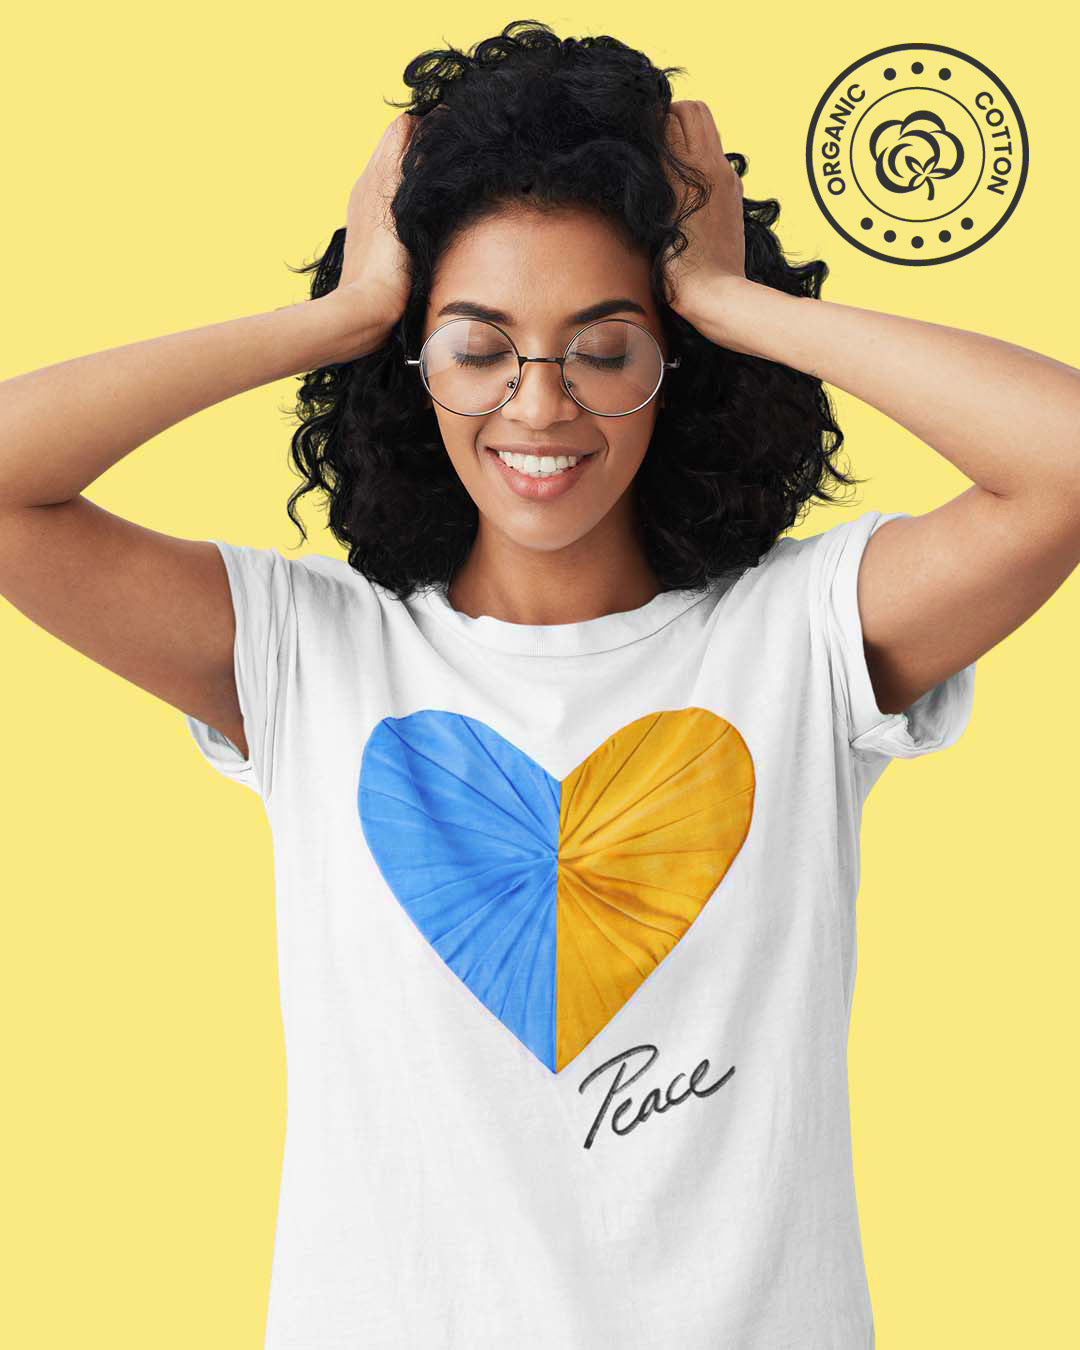 Peace and Love White Unisex Organic Cotton Tee